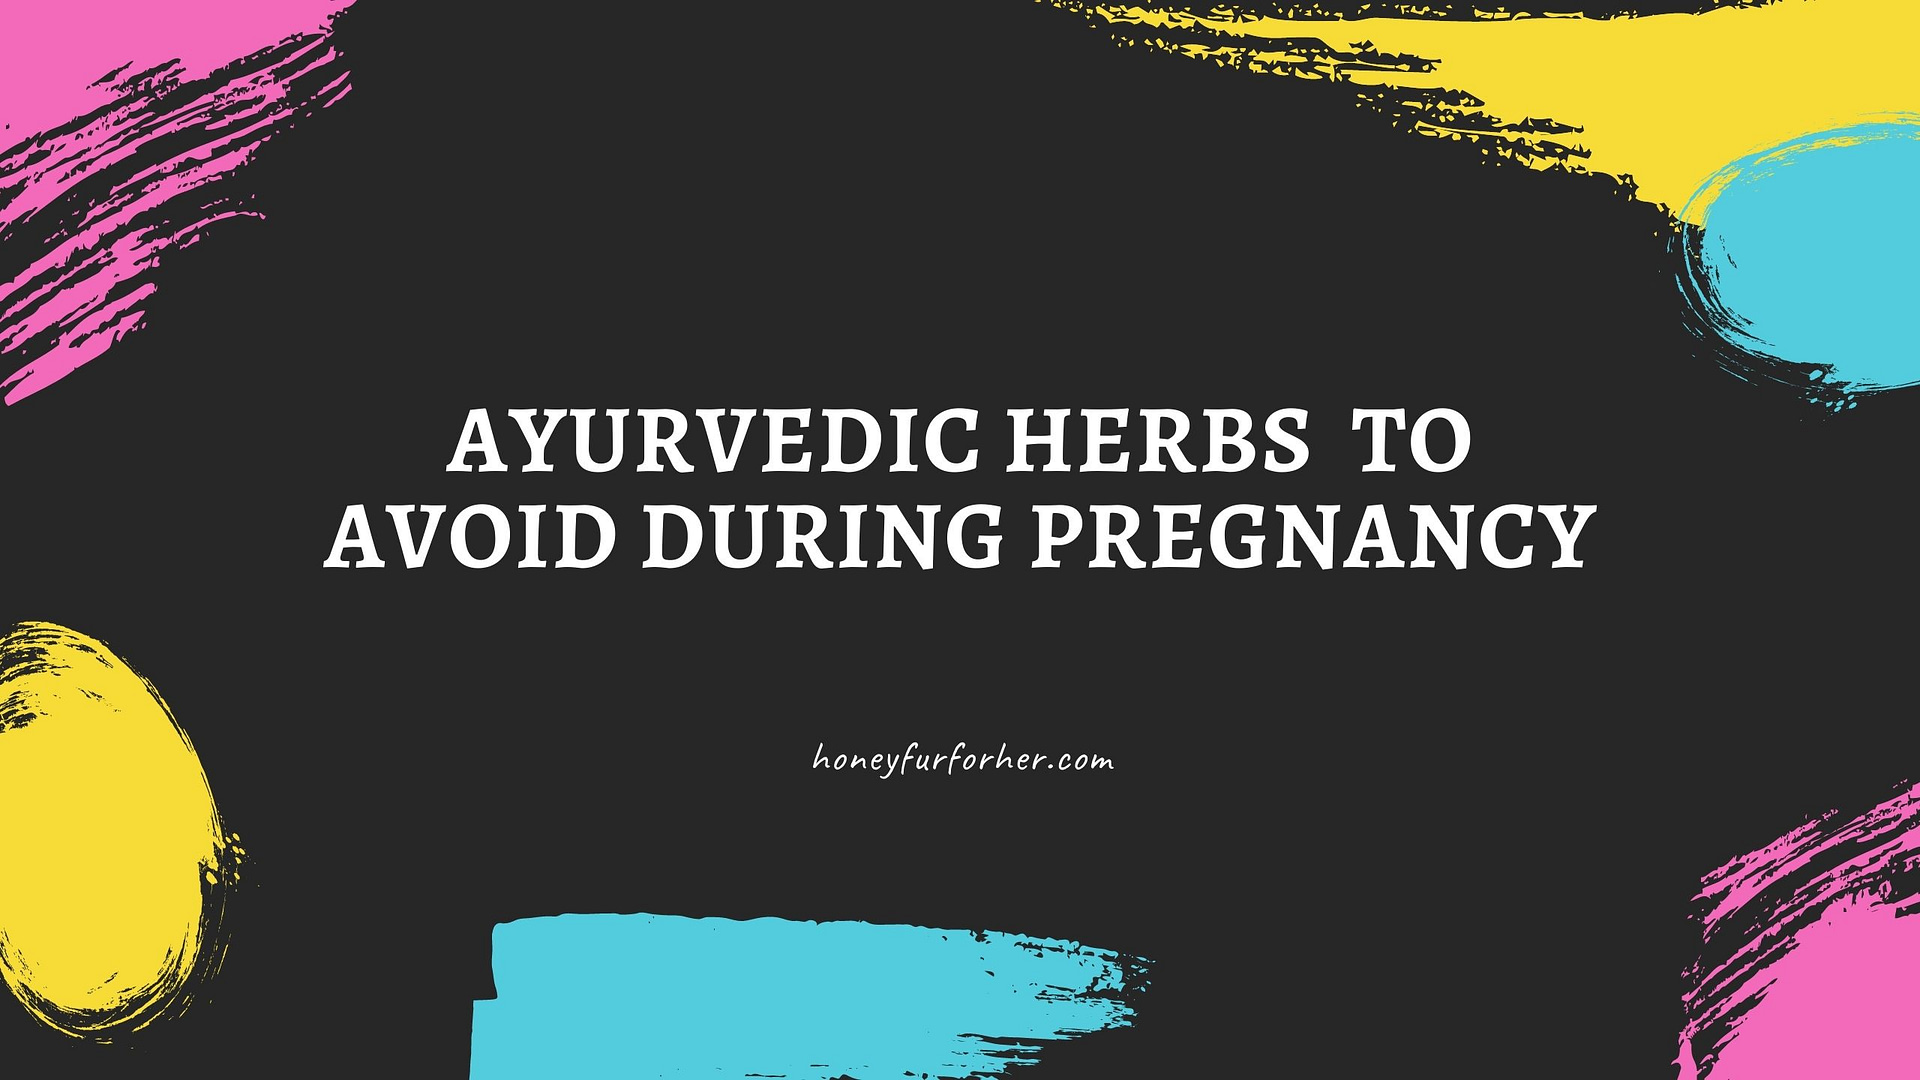 Ayurvedic herbs to avoid in pregnancy feature image